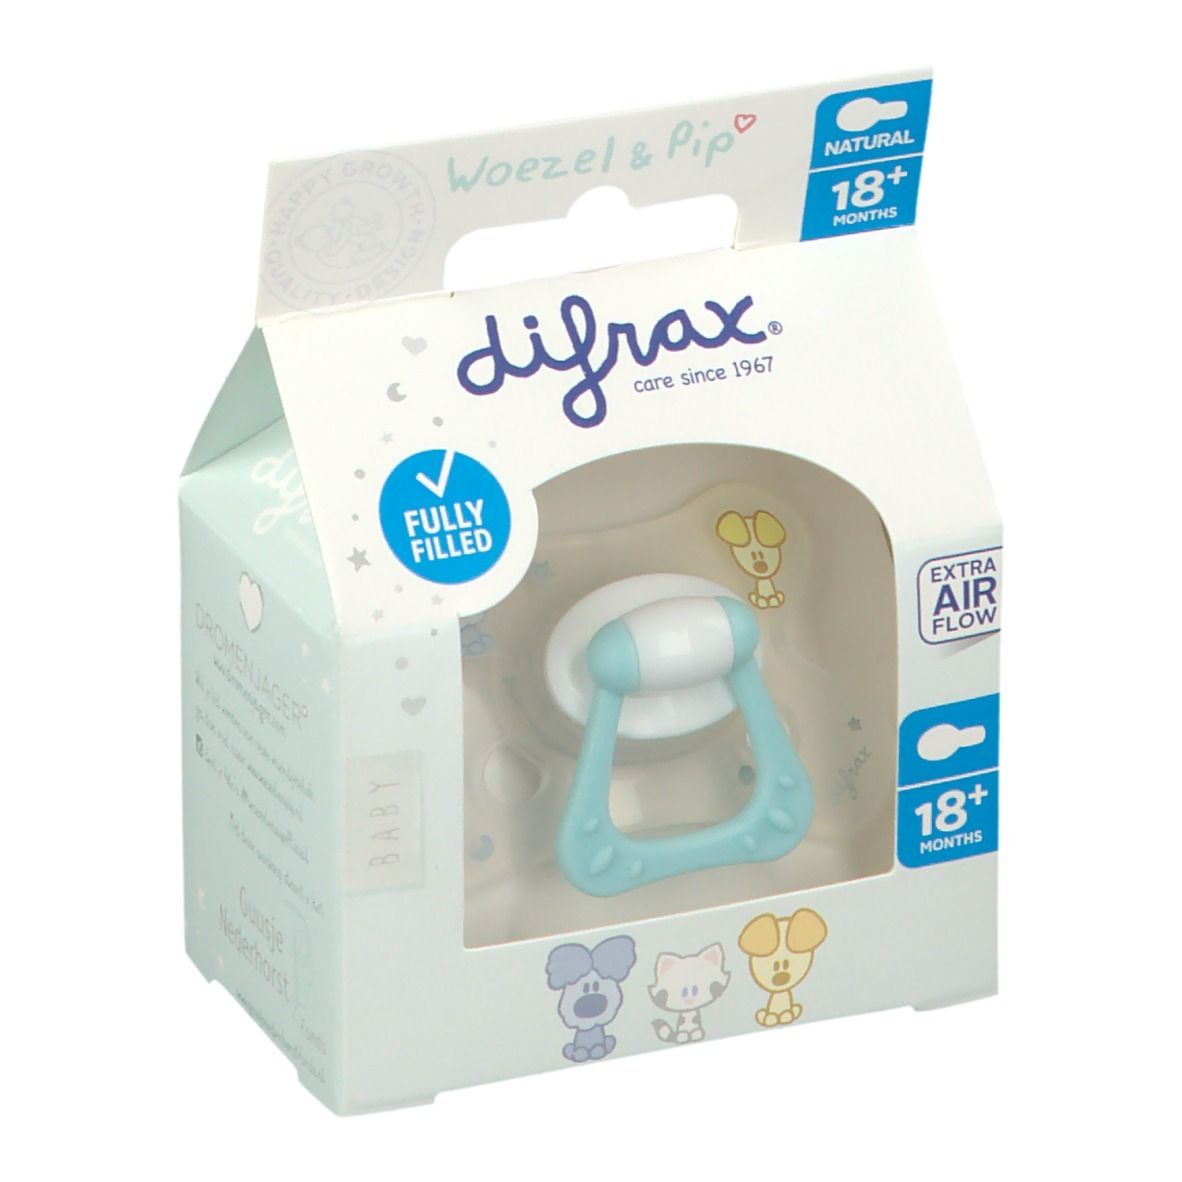 Difrax® Sucette Natural Woezel & Pip +18 mois